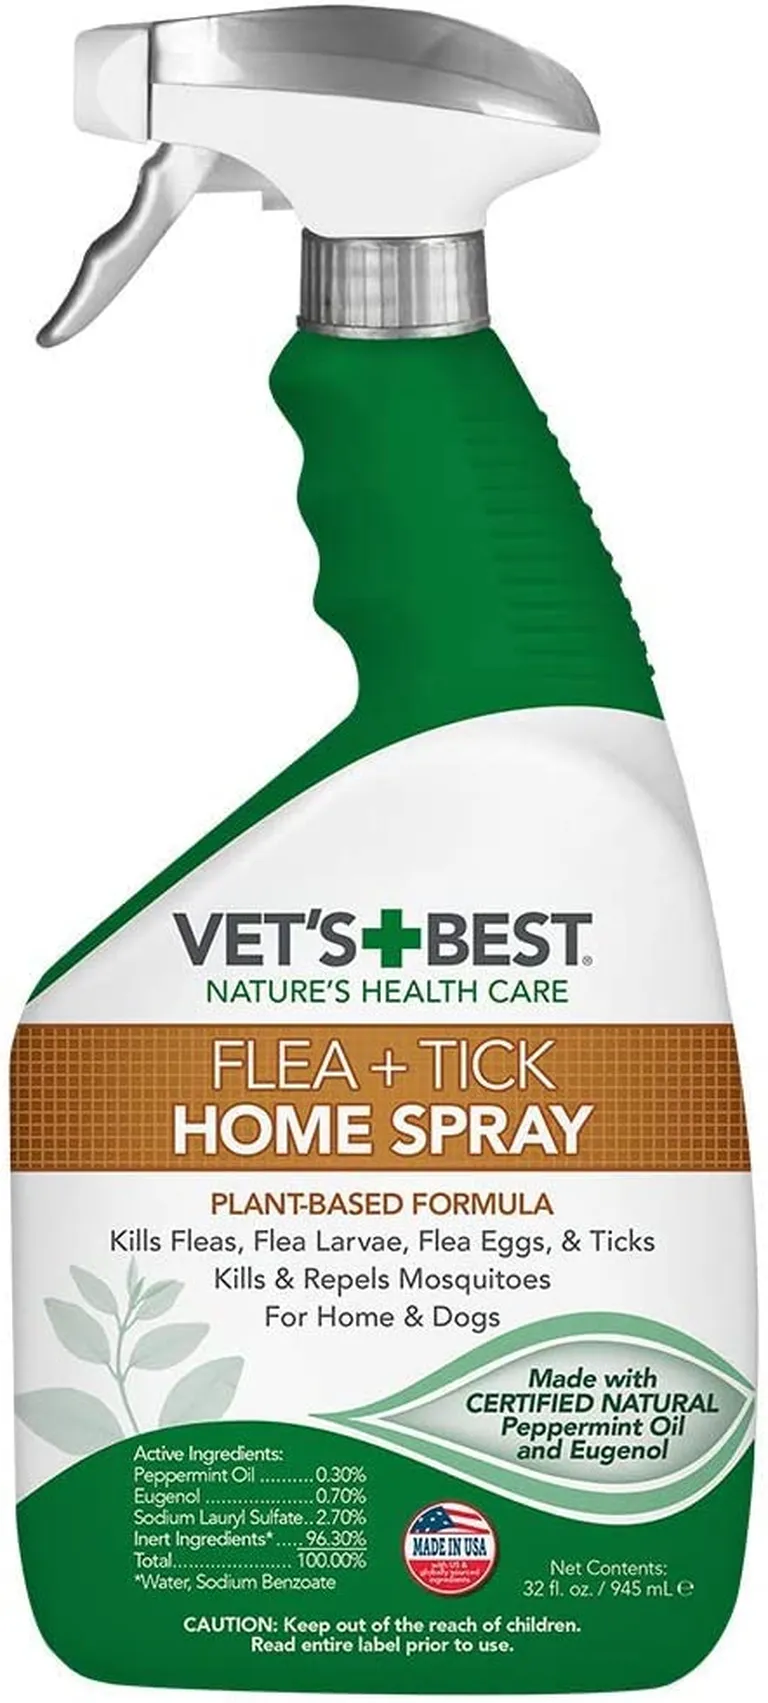 Vets Best Flea and Tick Home Spray Photo 1